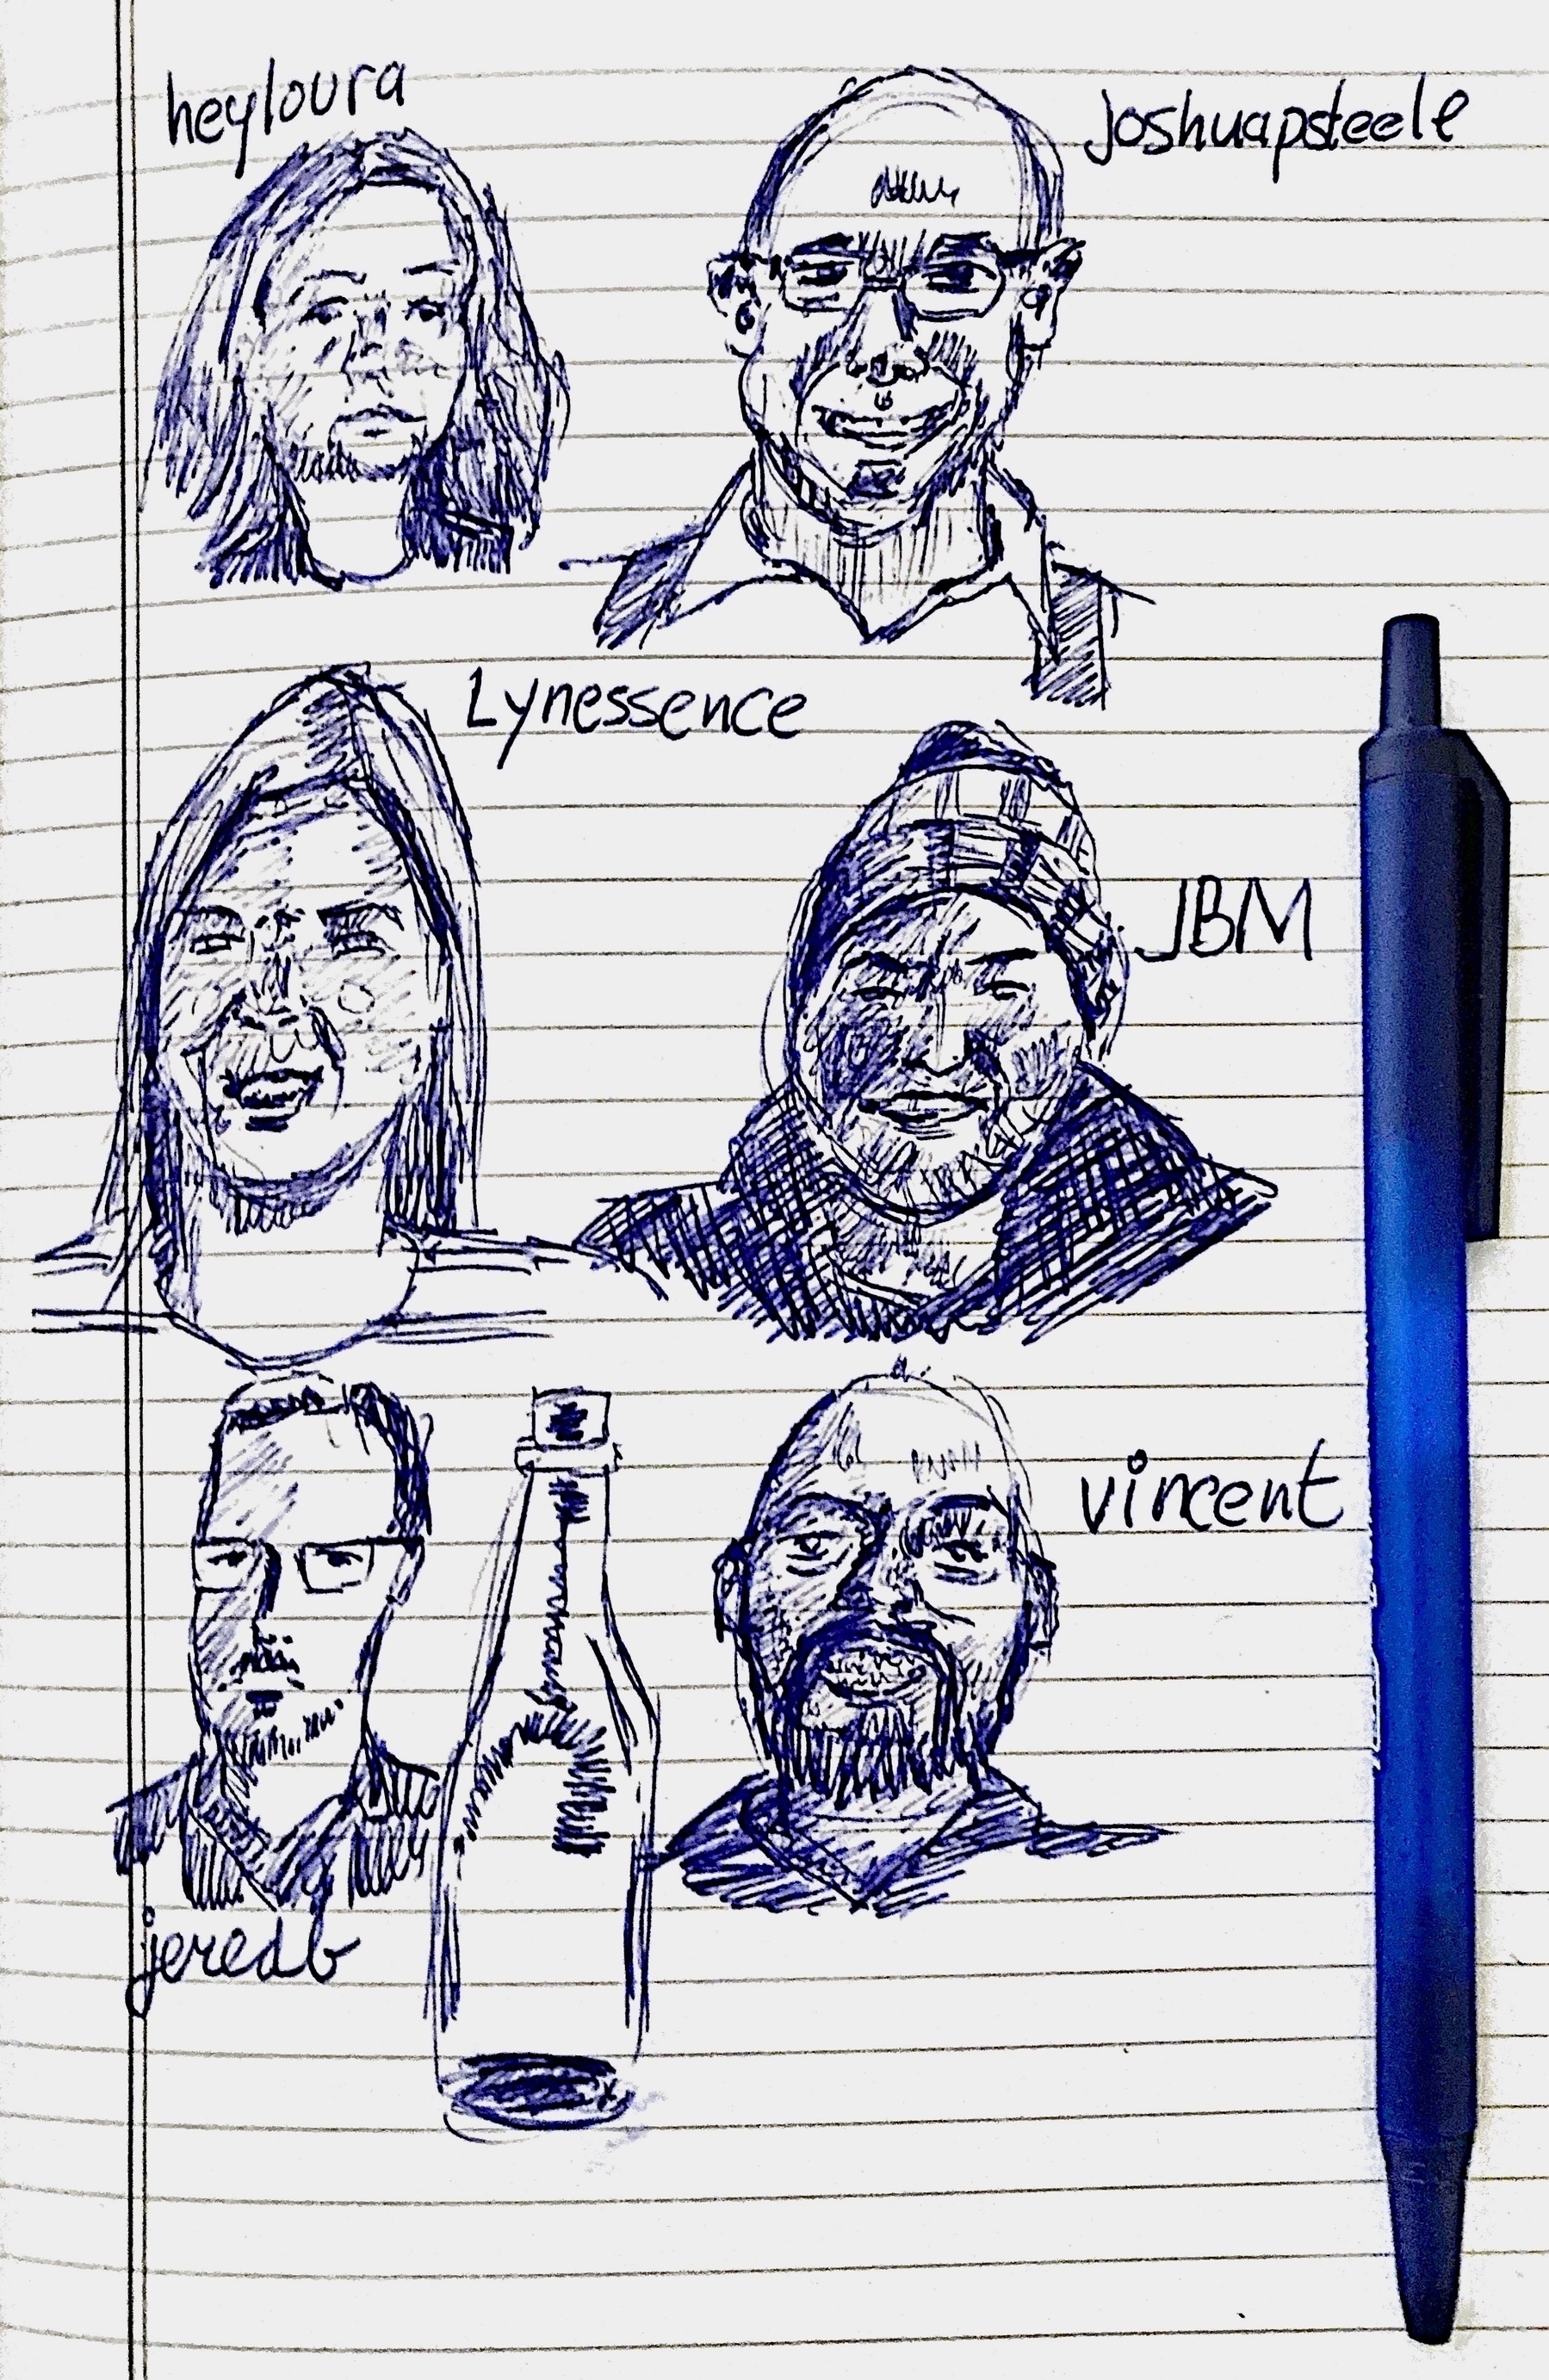 ballpoint pen sketch of several bloggers on the micro∙blog timeline